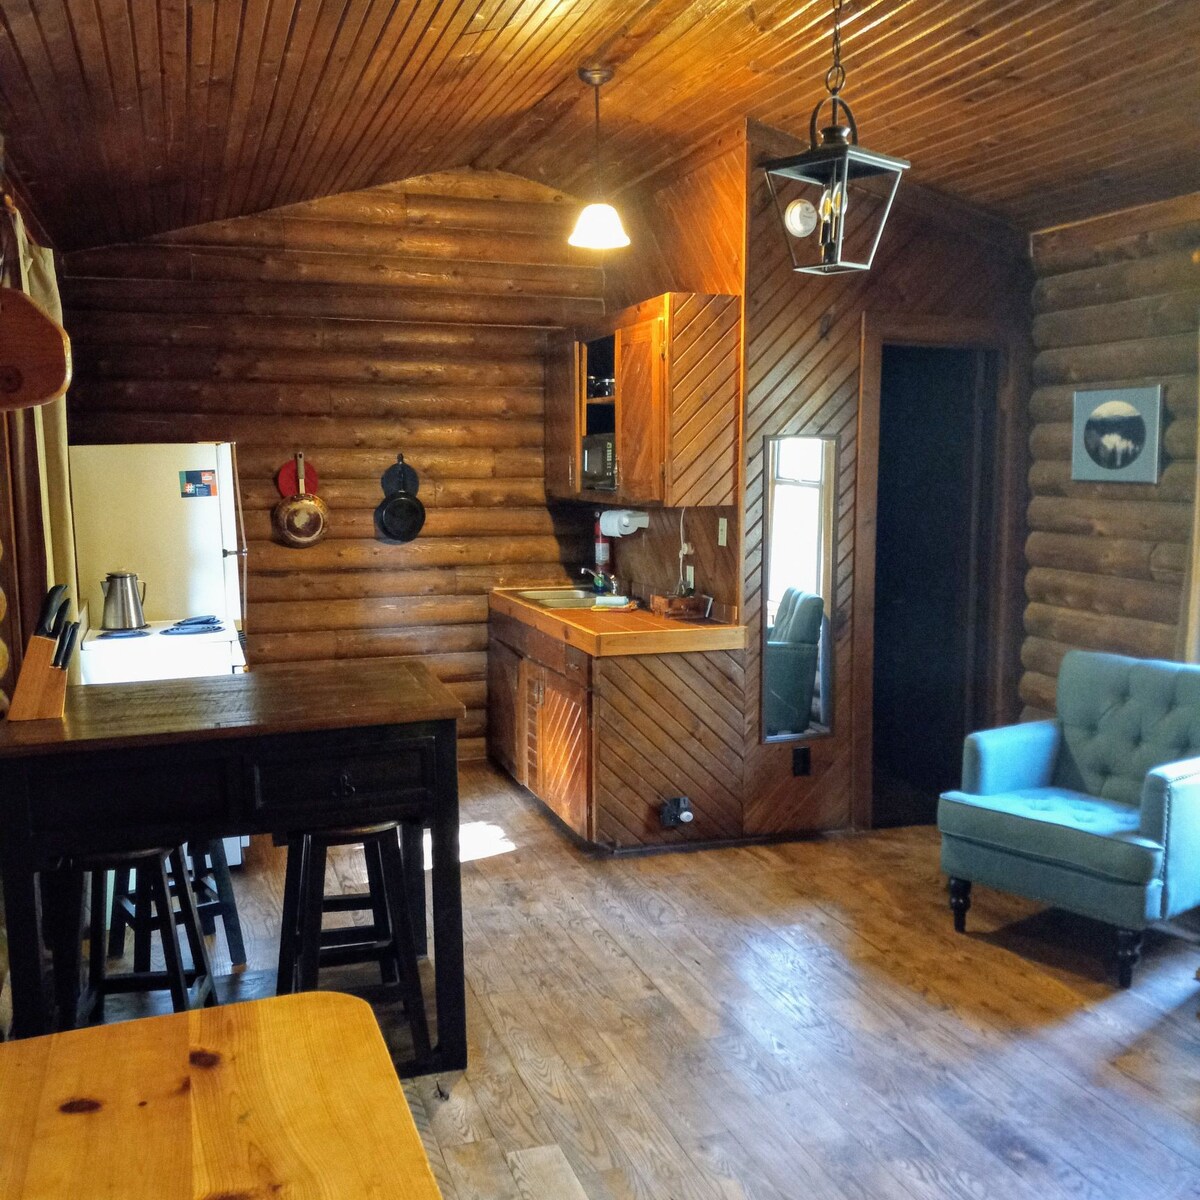 The Hideaway Ranch - The Frontier Cabin